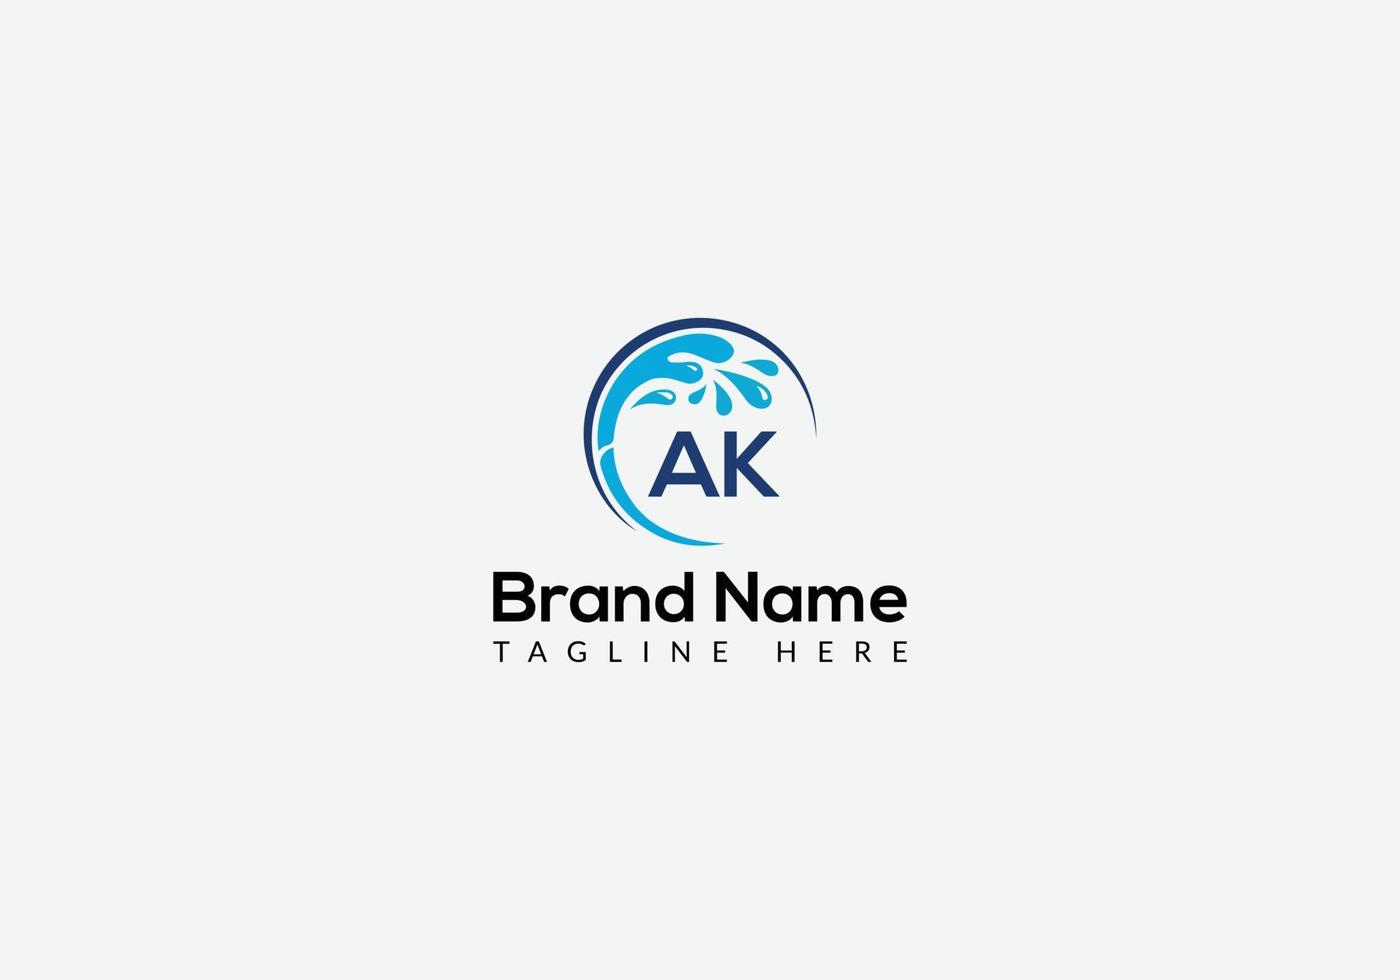 Maid Cleaning Logo On Letter AK. Clean House Sign, Fresh Clean Logo Cleaning Brush and Water Drop Concept Template vector